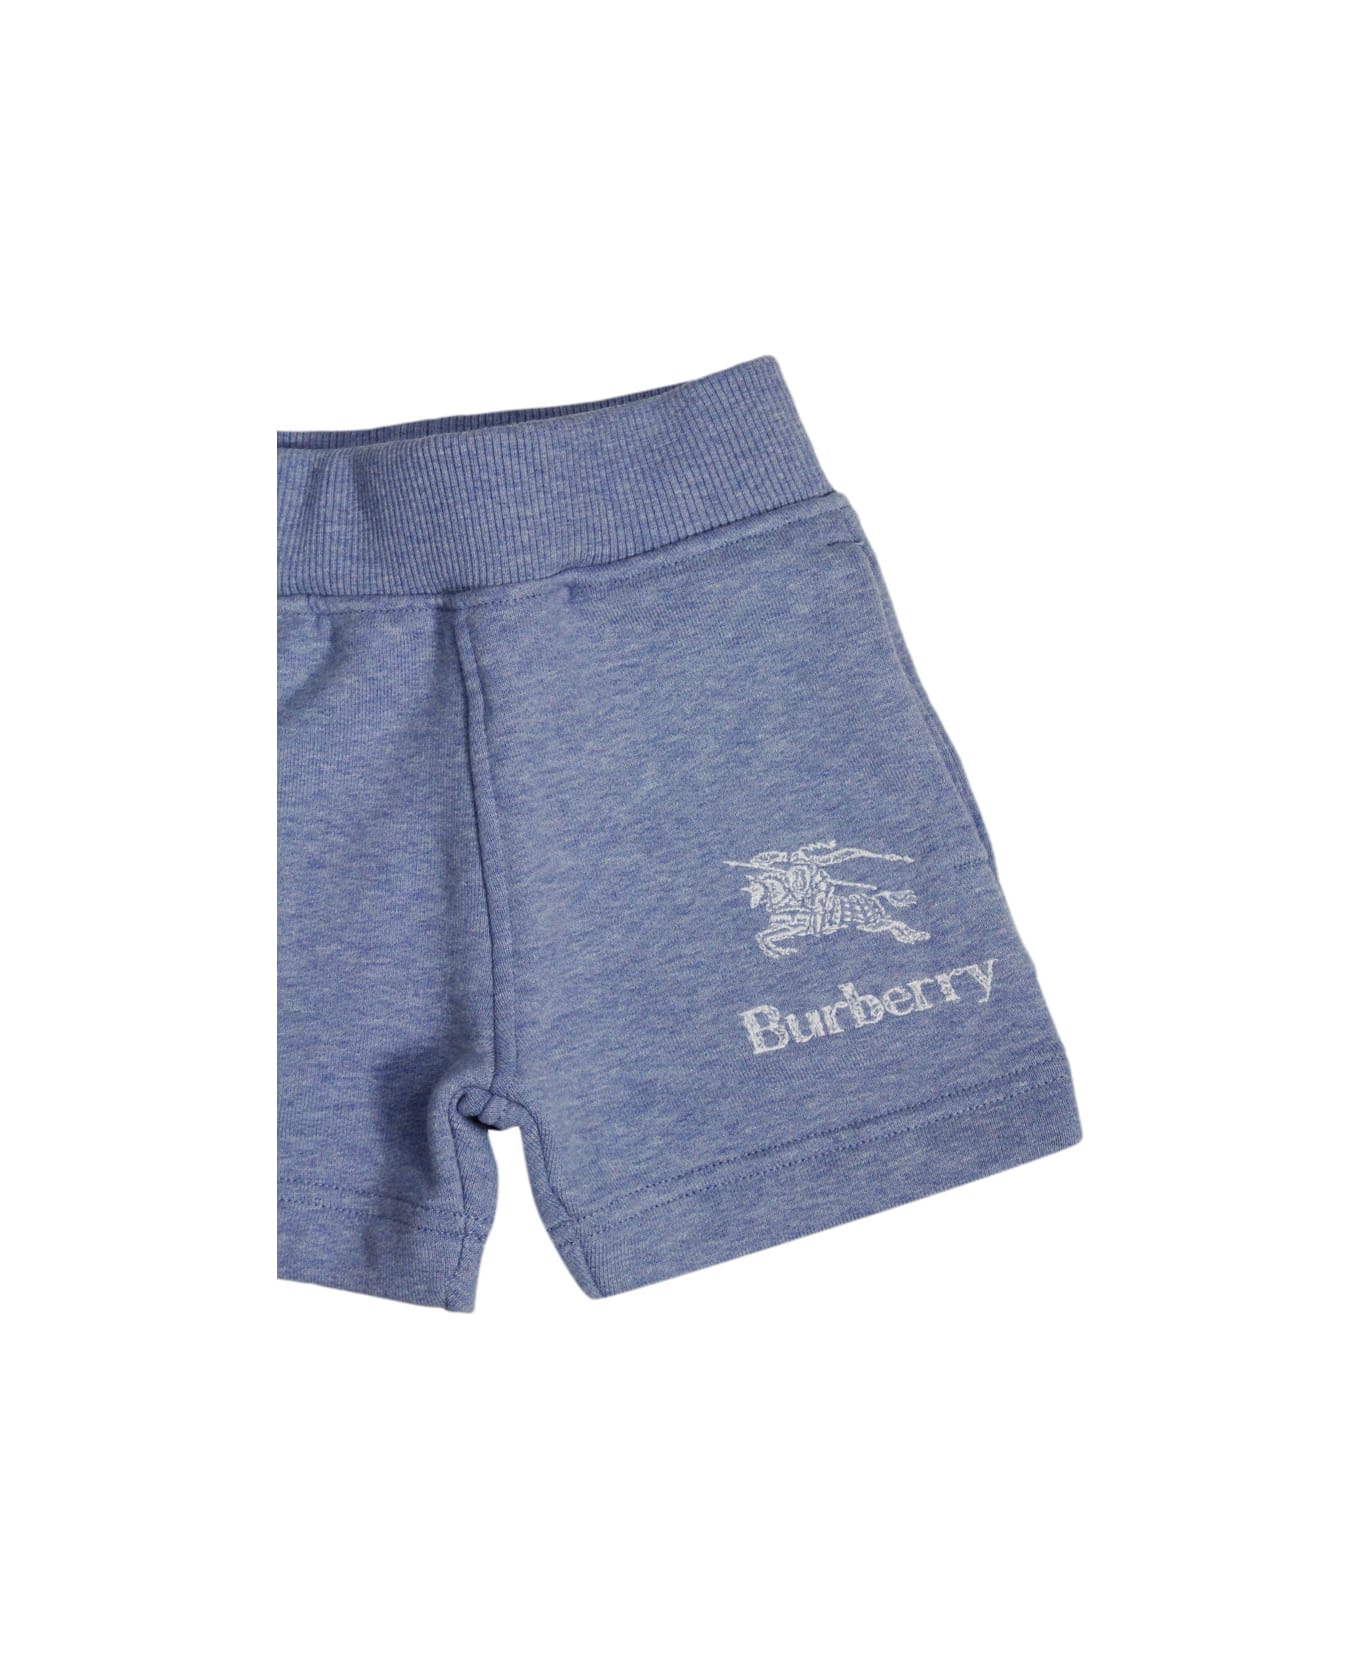 Burberry Cotton Fleece Bermuda Shorts With Elasticated Waist And Welt Pockets With Logo On The Front - Light Blu